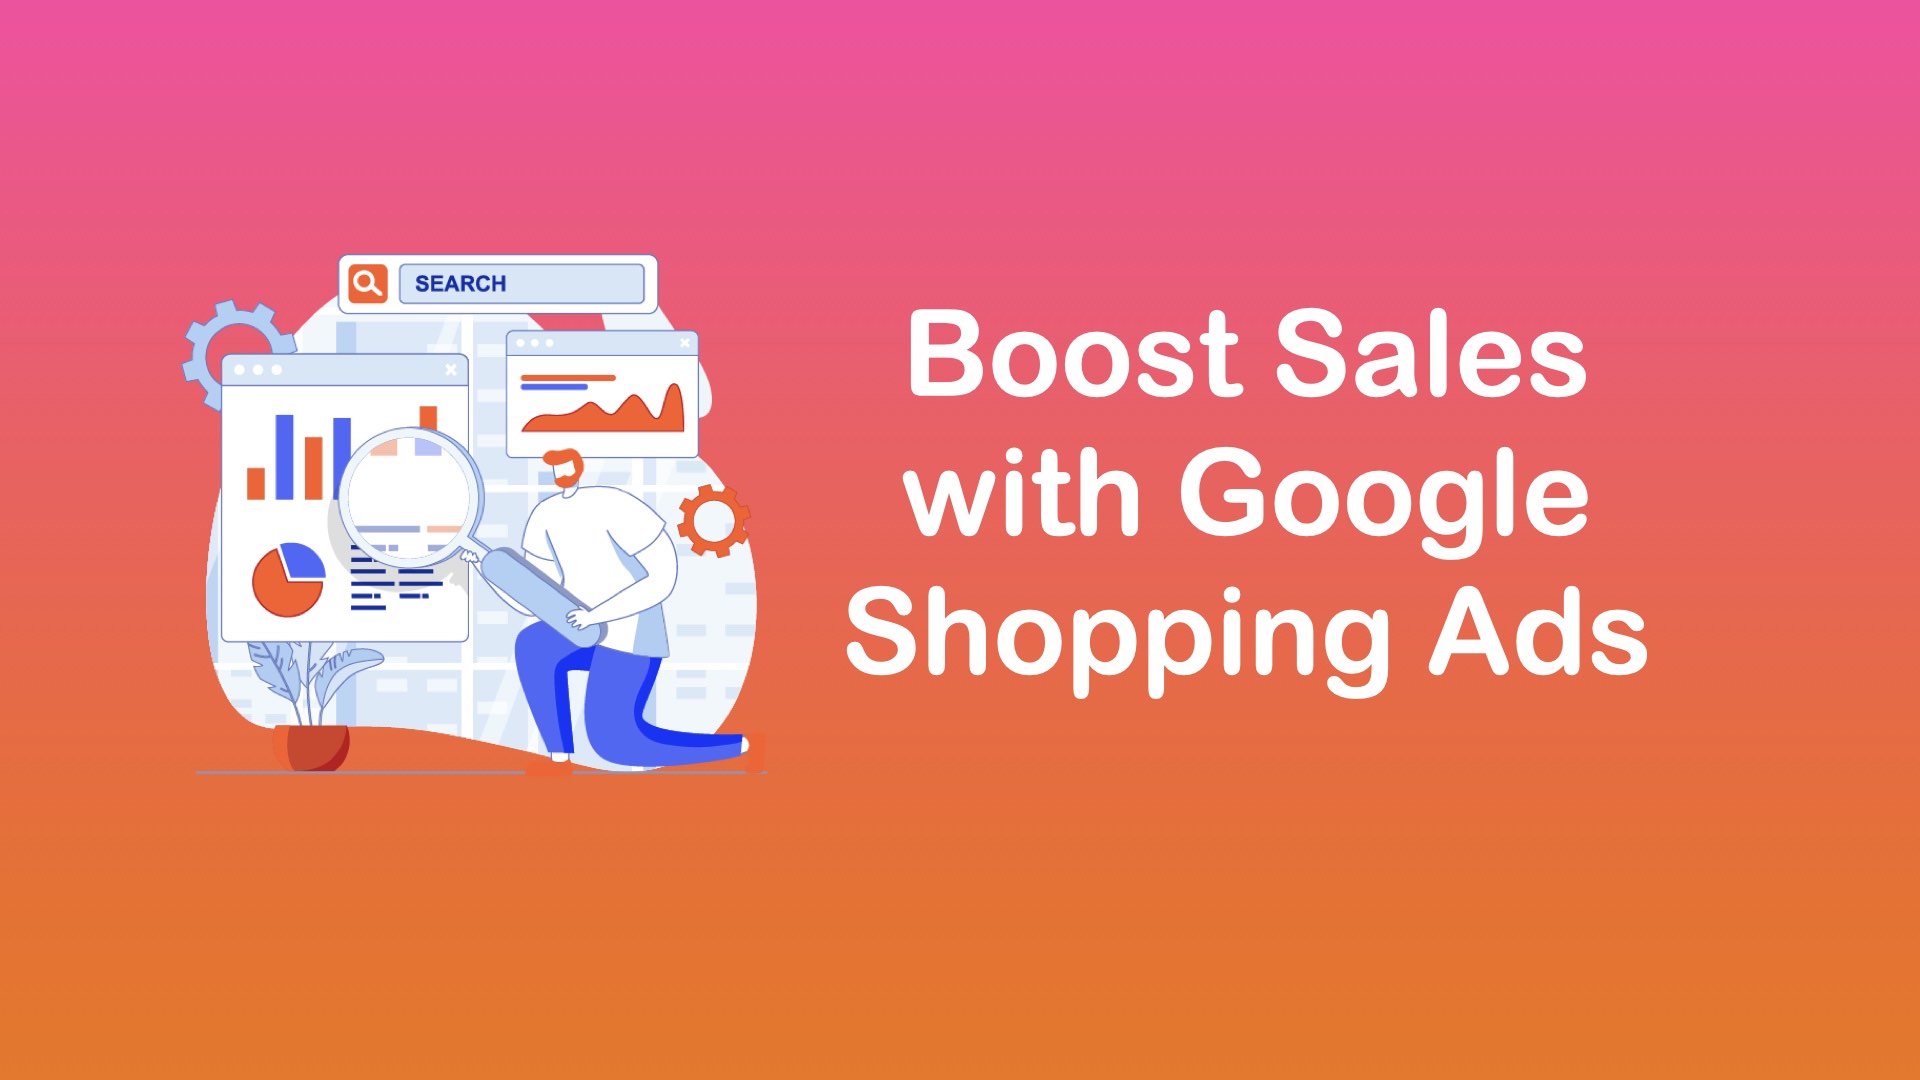 Boost Sales with Google Shopping Ads